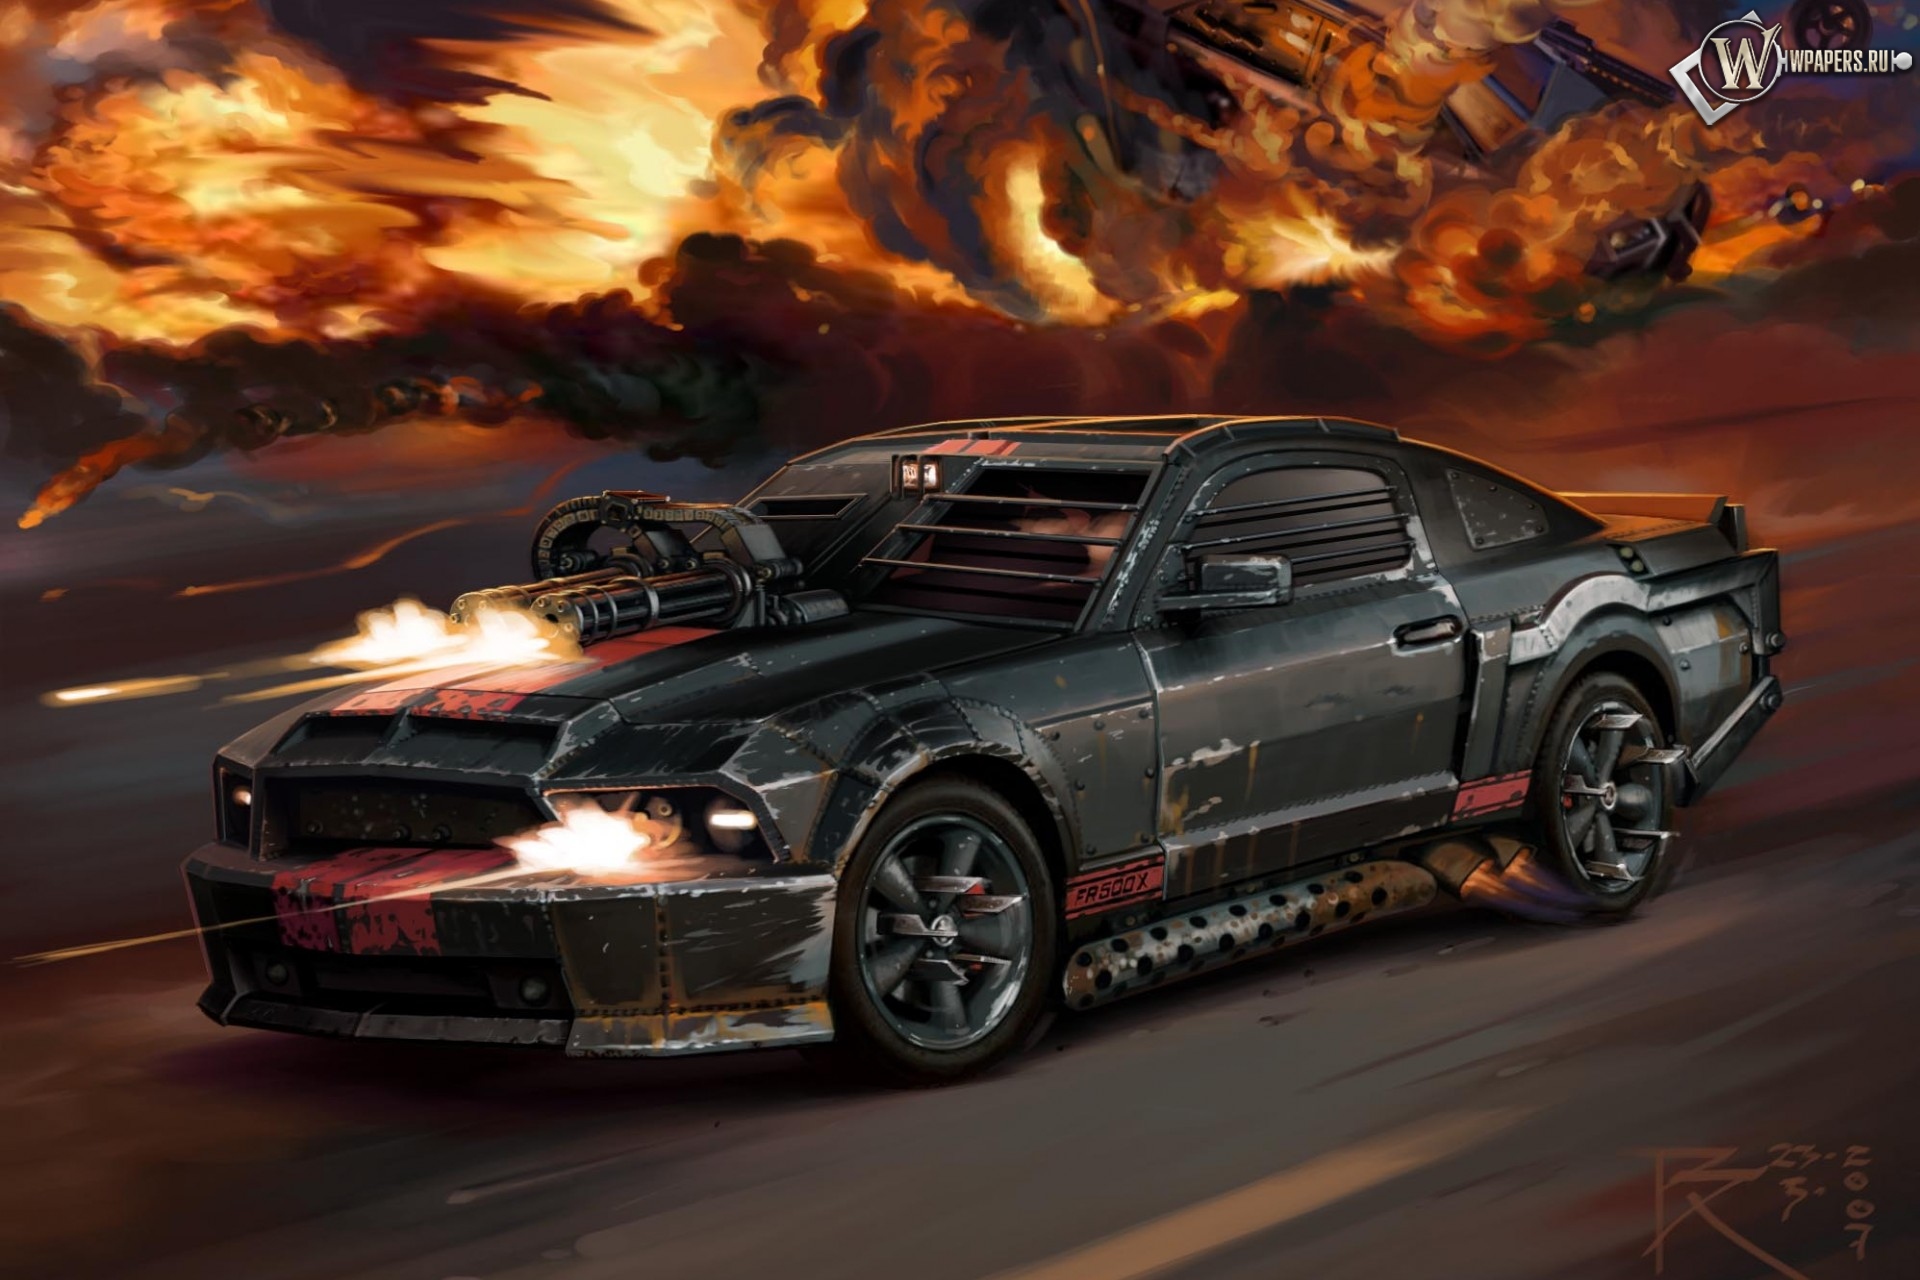 Car ford mustang death race 1920x1280